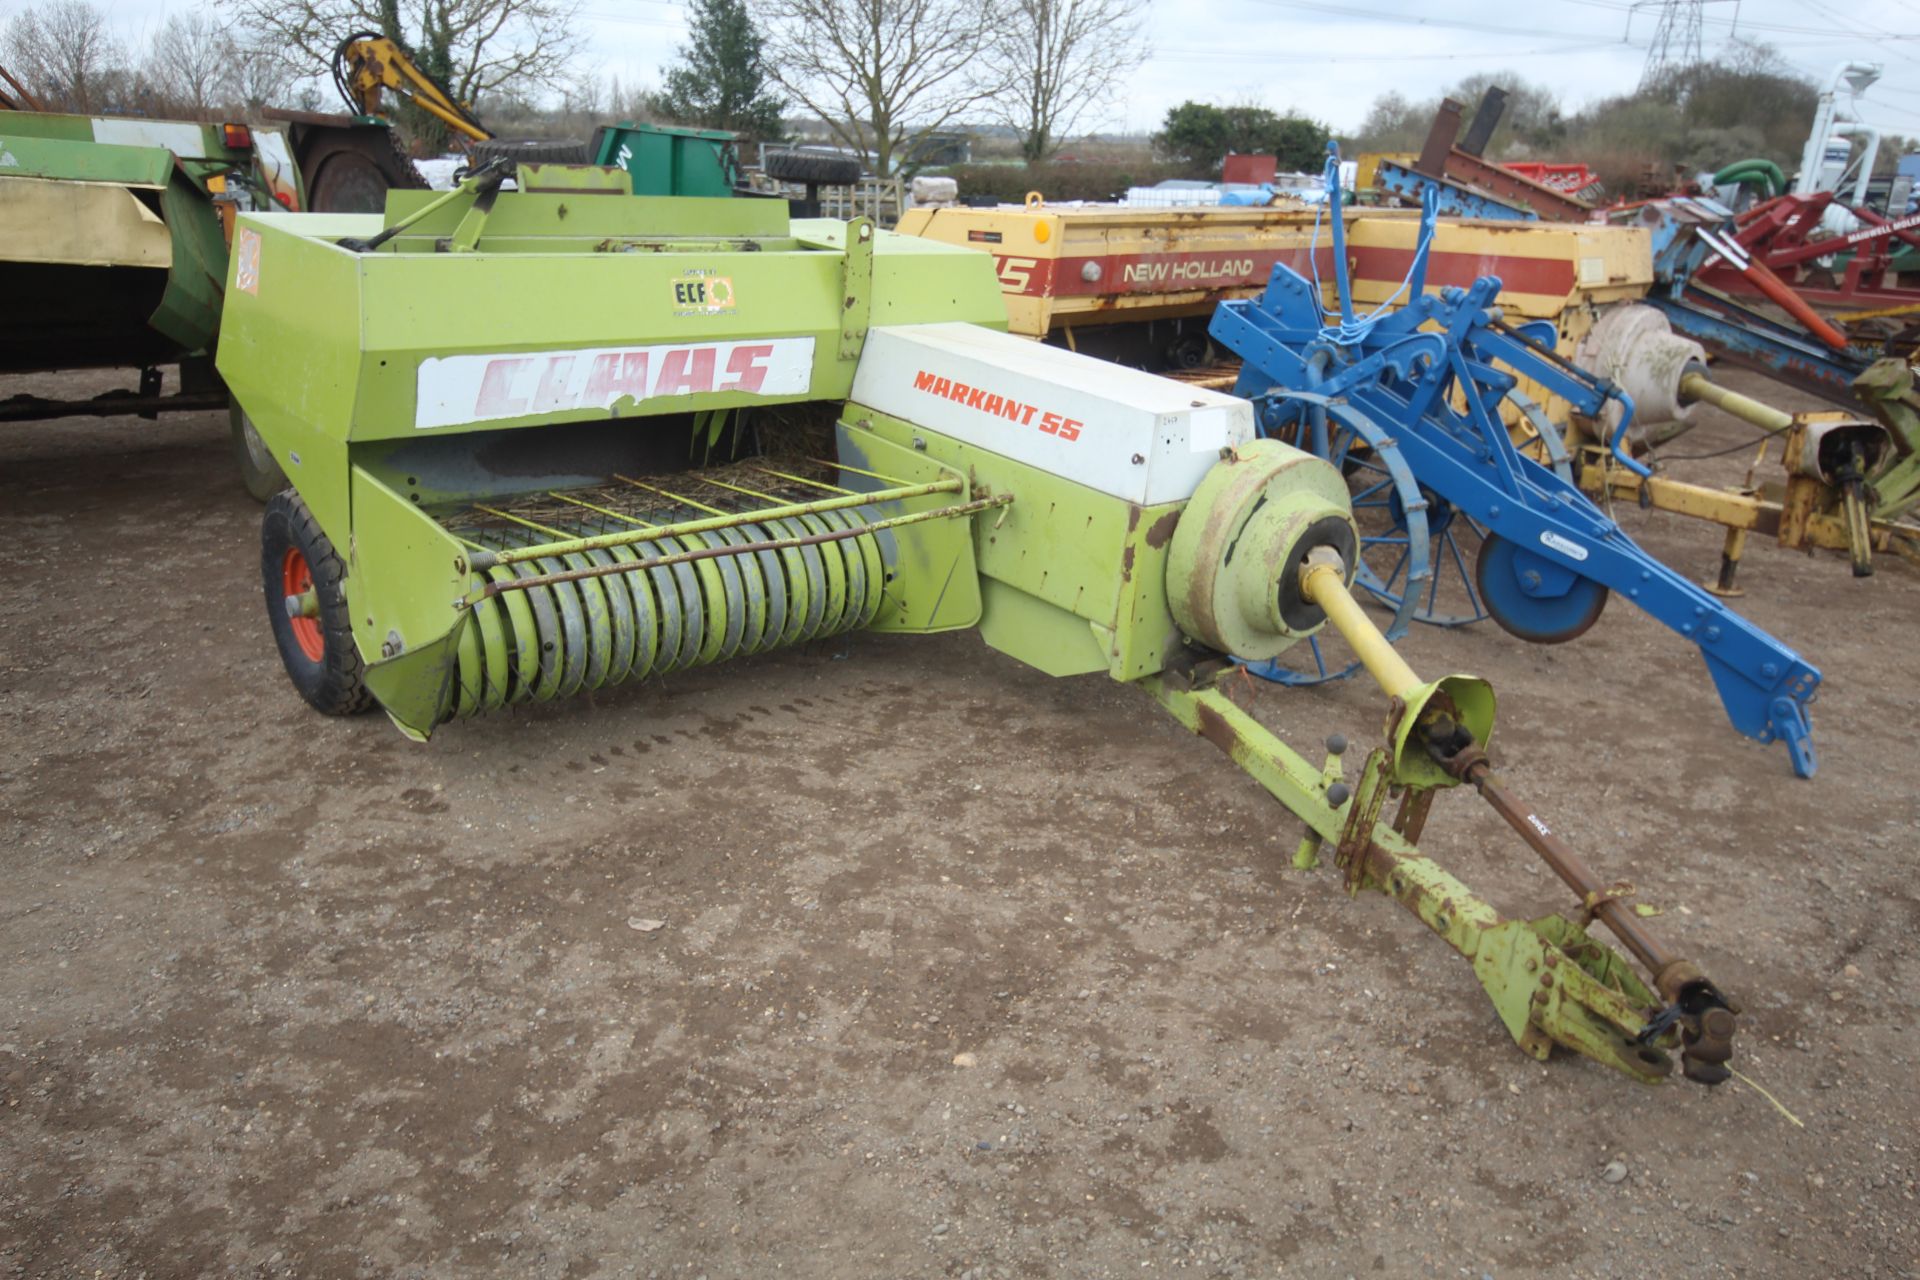 Claas Markant 55 conventional baler.